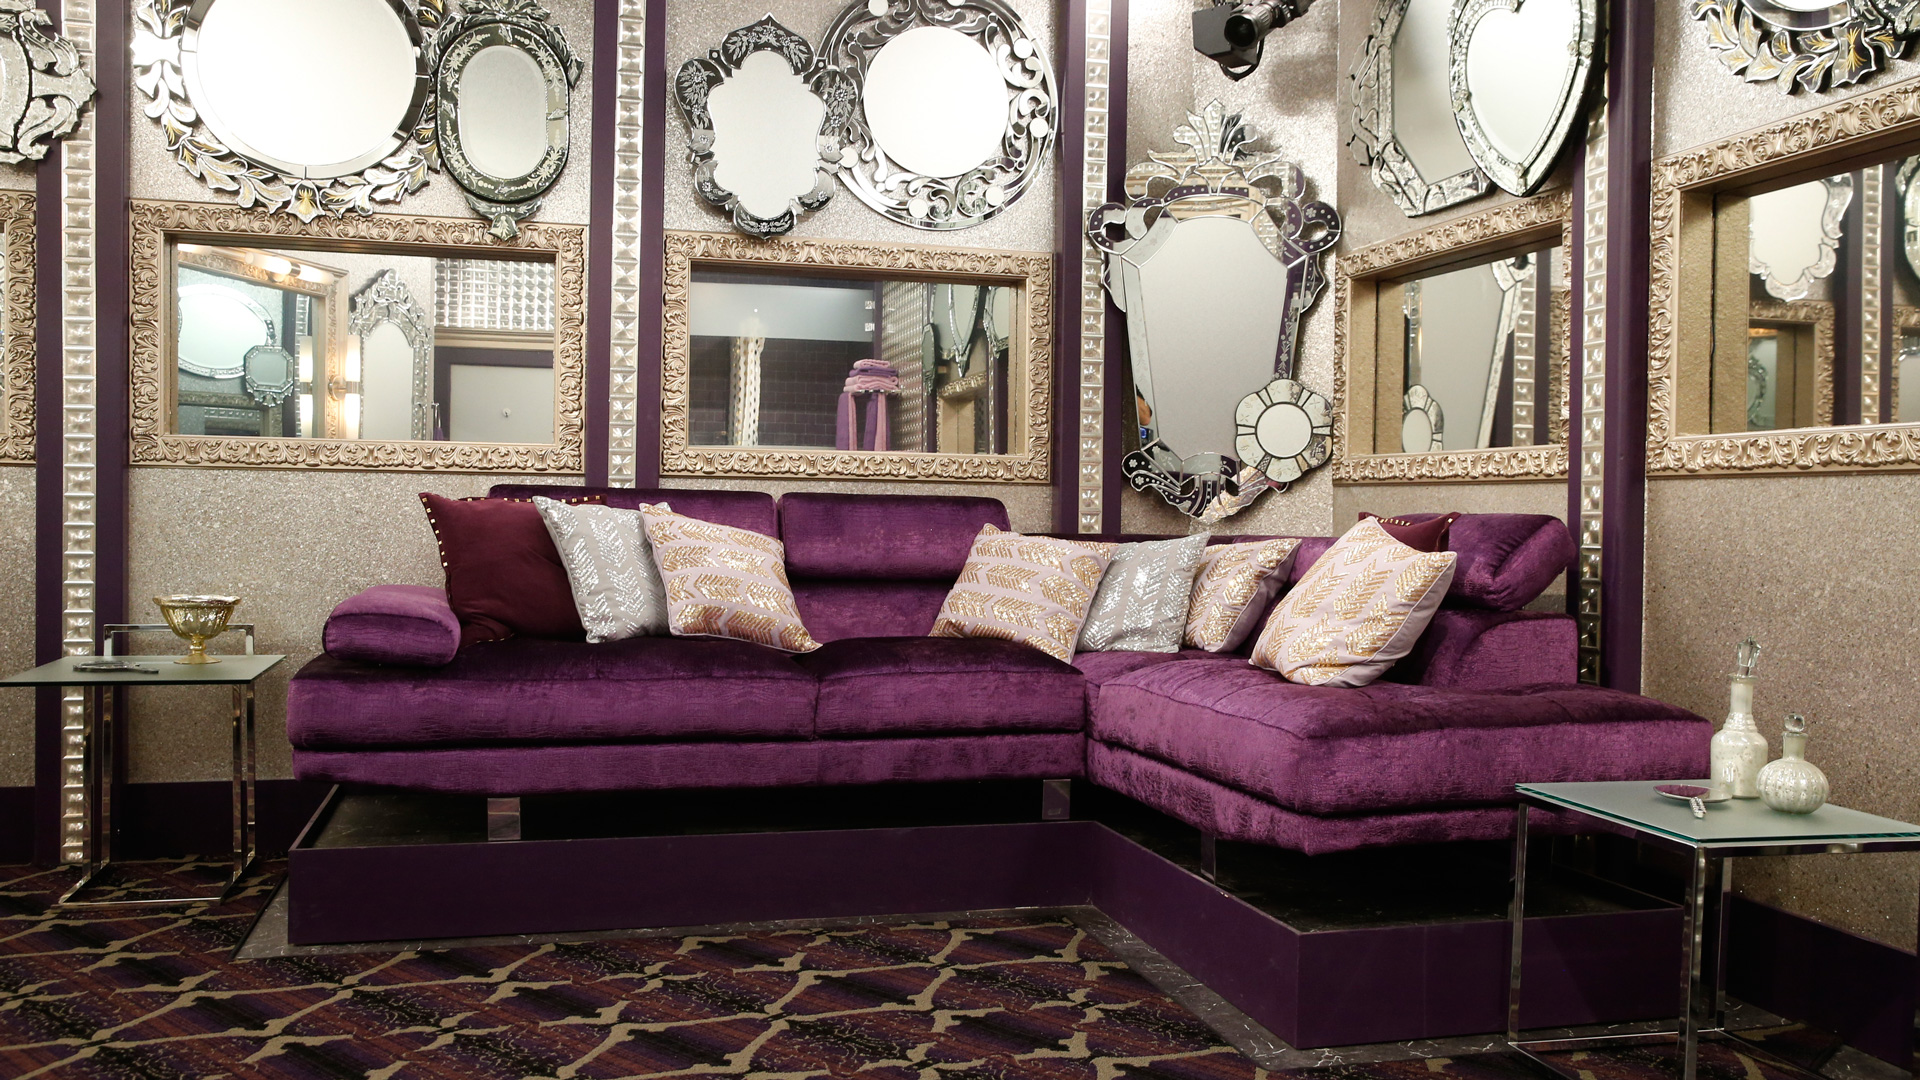 Shades of purple and silver give this room a most sophisticated touch.